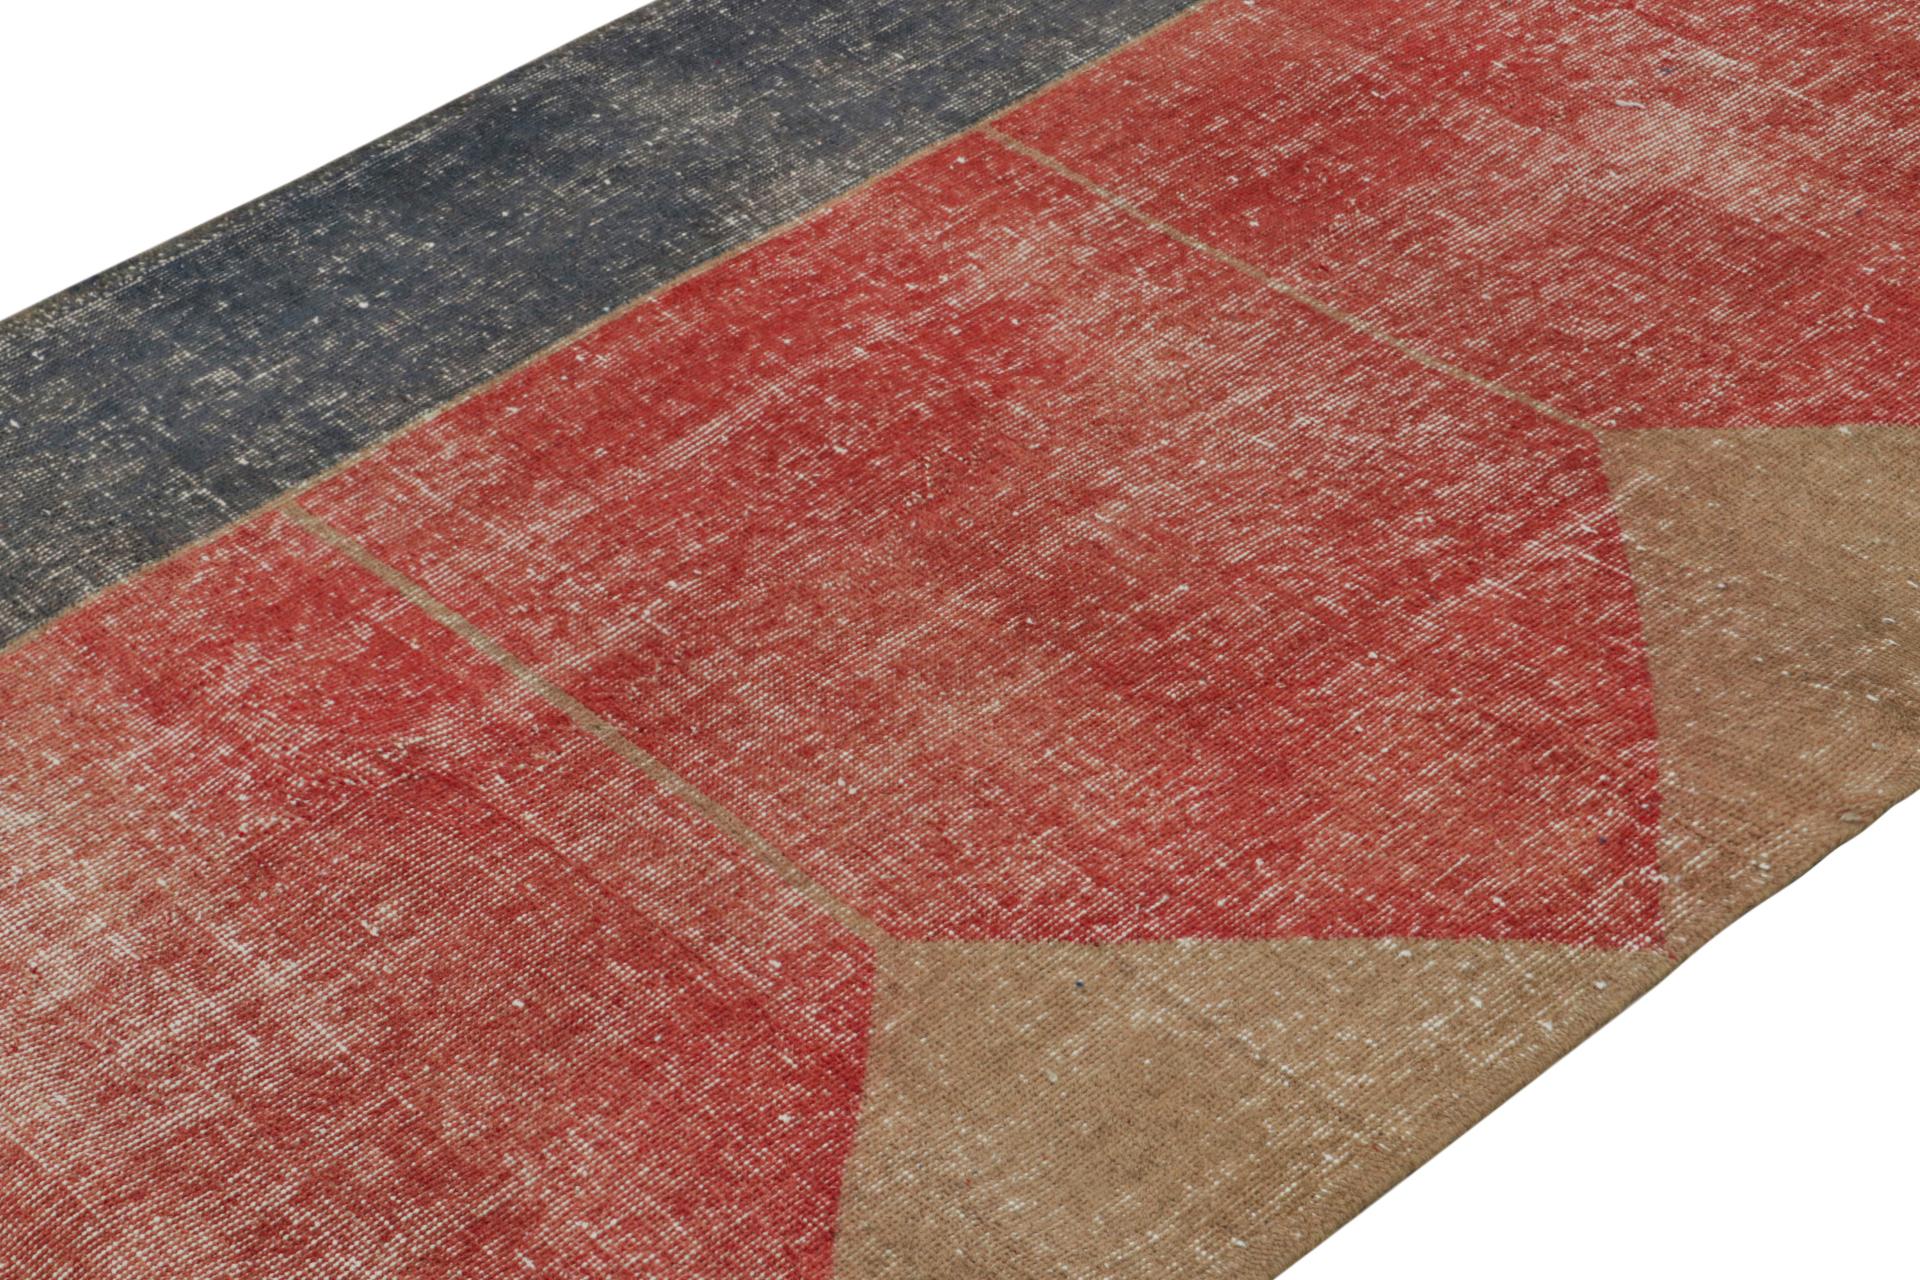 Hand-Knotted Vintage Turkish Rug in Brick Red, with Geometric Patterns, from Rug & Kilim For Sale